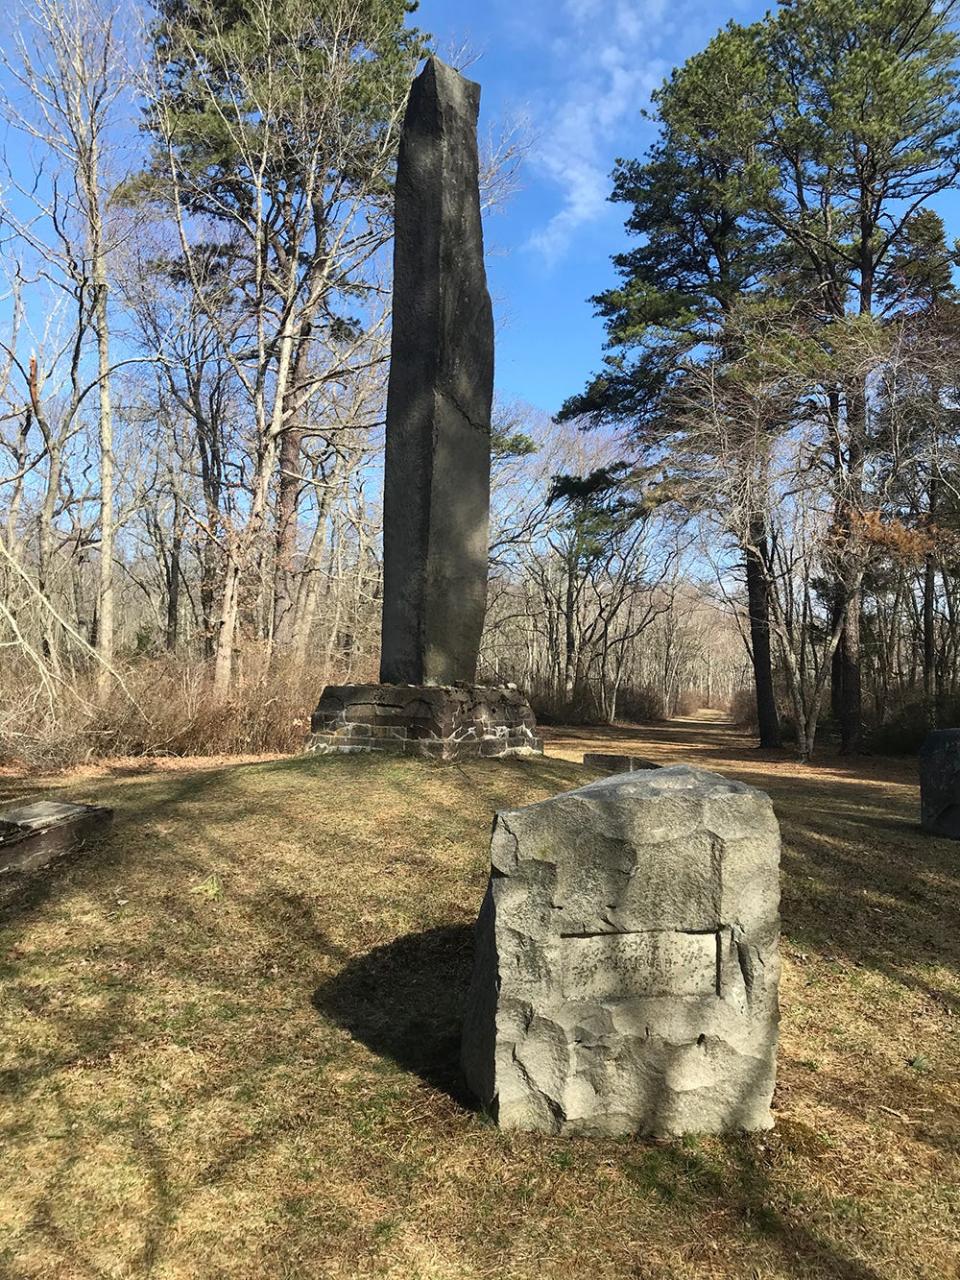 The Great Swamp Fight Monument, at the northern tip of the Great Swamp Management Area, stands on a mound at the center of a circular clearing.